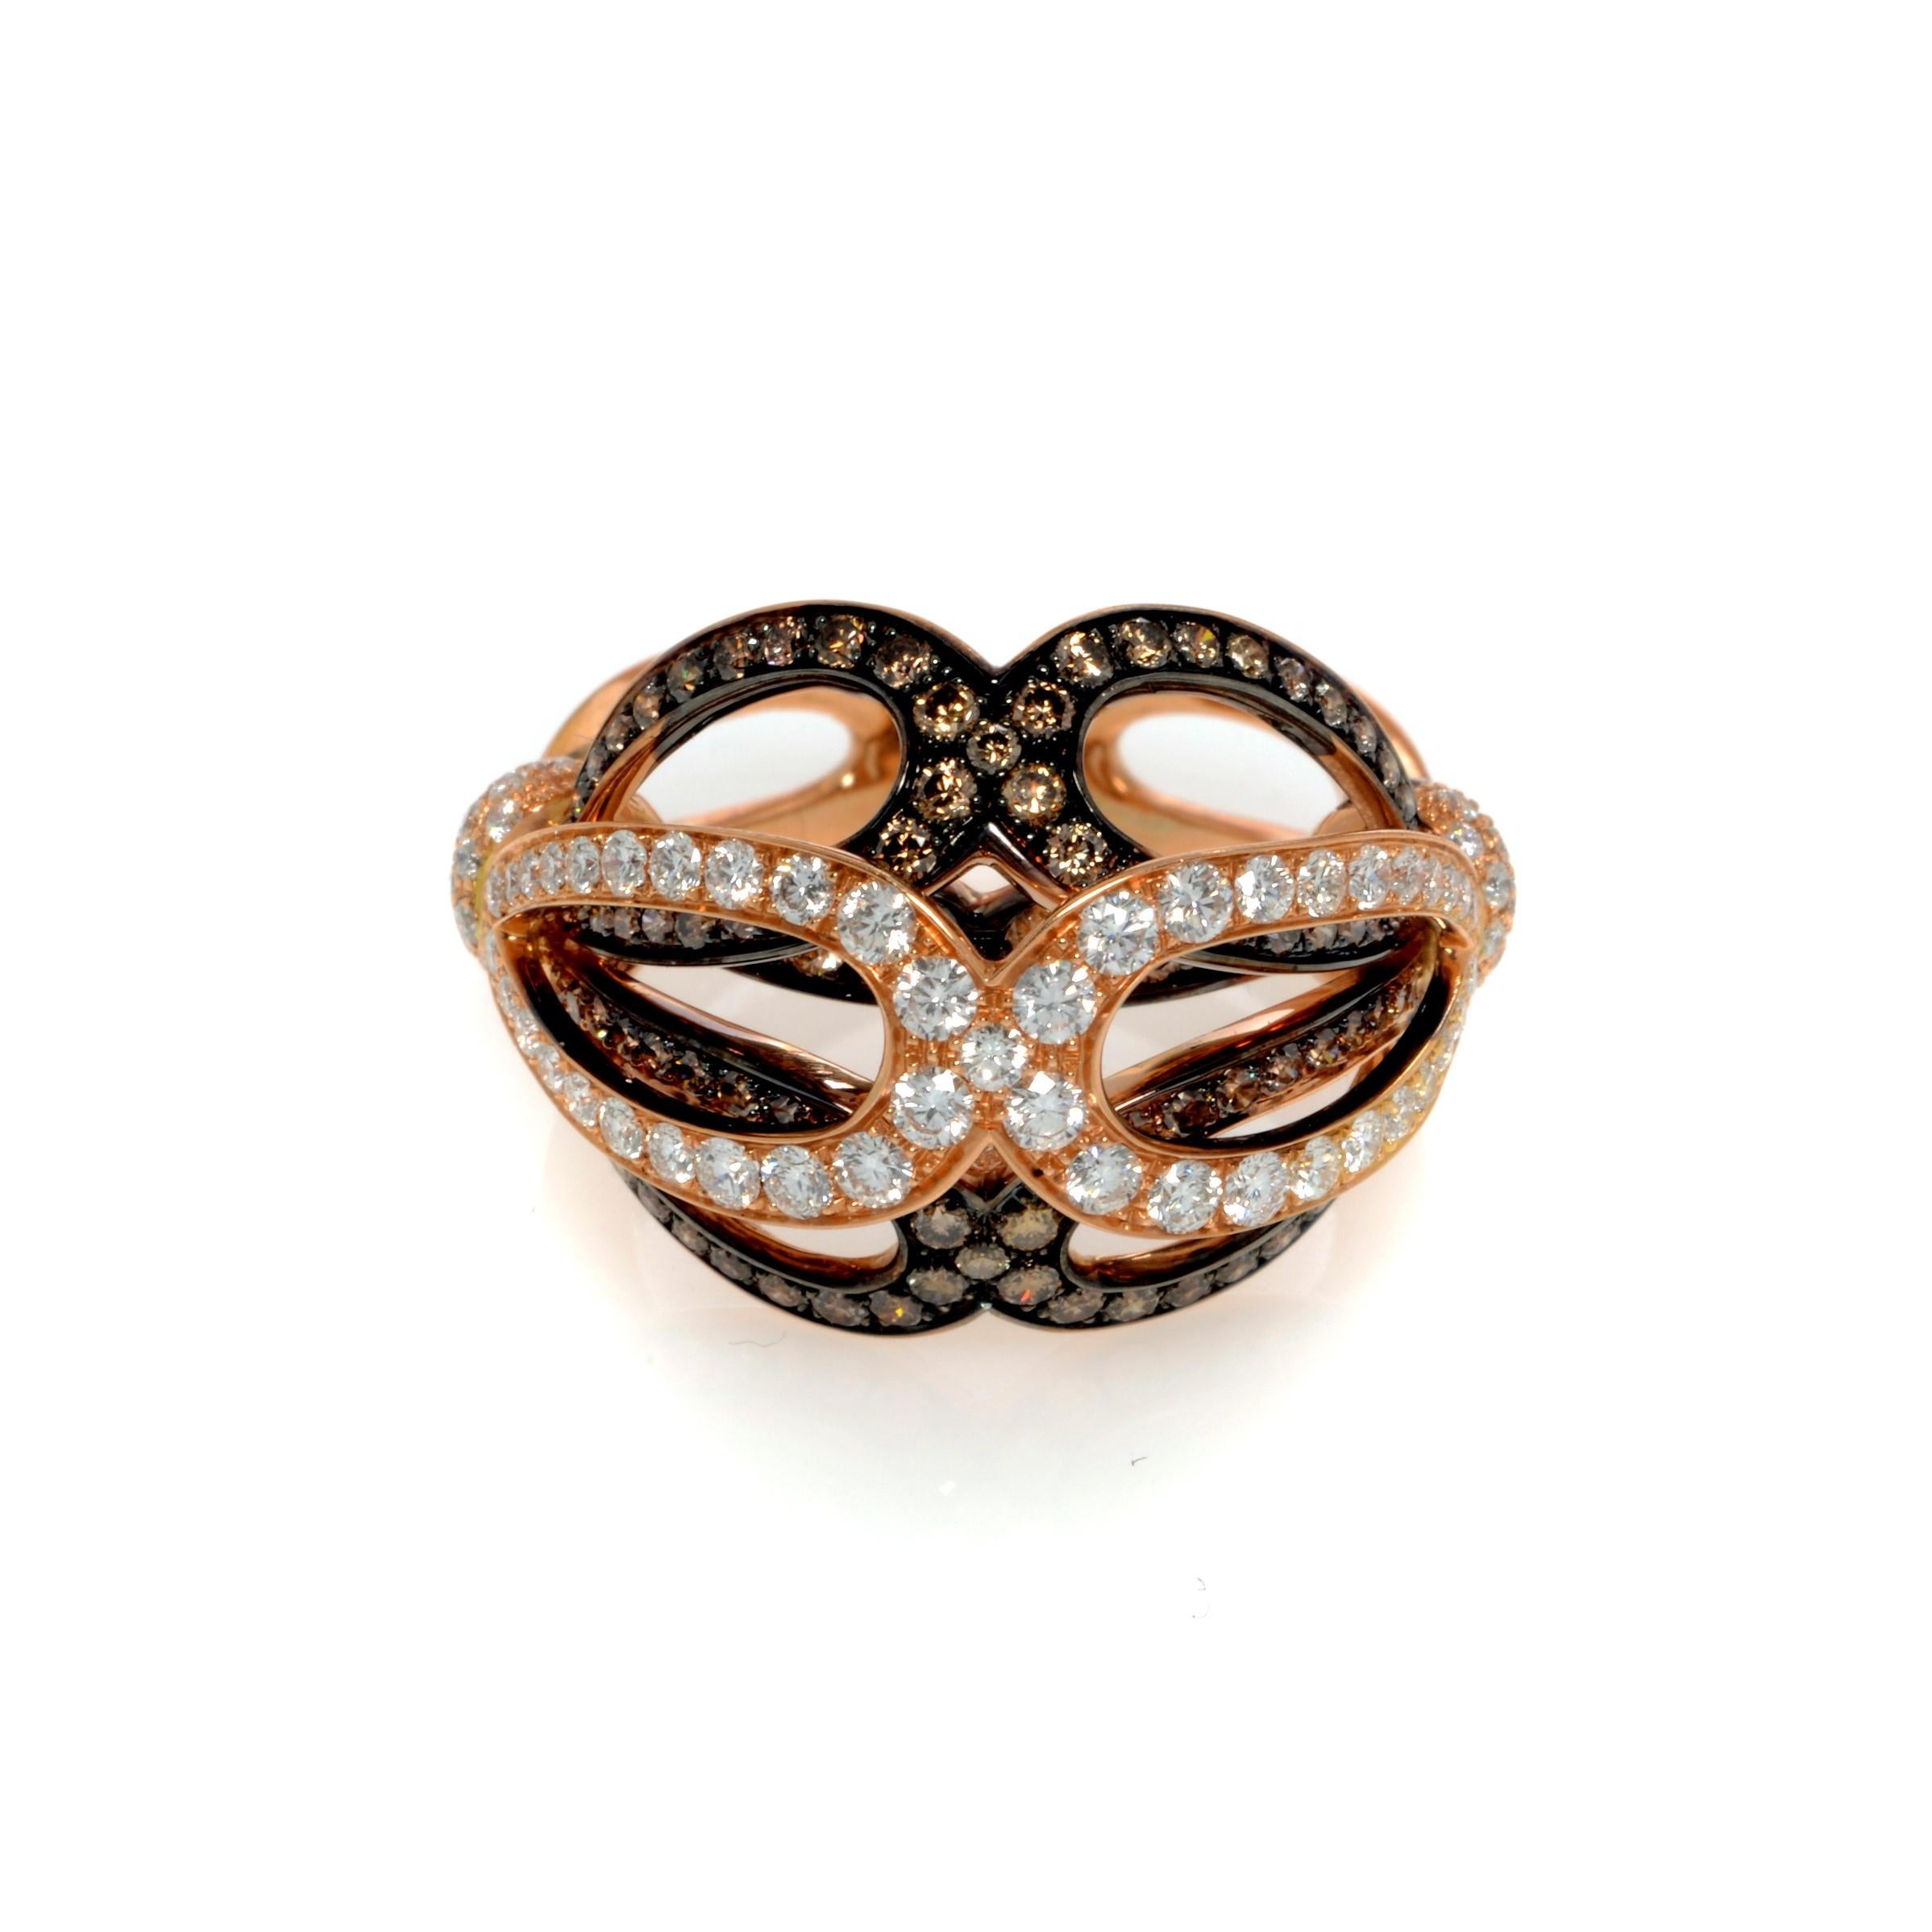 18k yellow gold, black rhodium, white and brown diamond cluster cocktail ring. This ring is pave set with 1.97cttw of brilliant cut white diamonds. Diamond color G and VVS clarity. Also set with round cut natural brown diamonds totaling 0.92cttw.